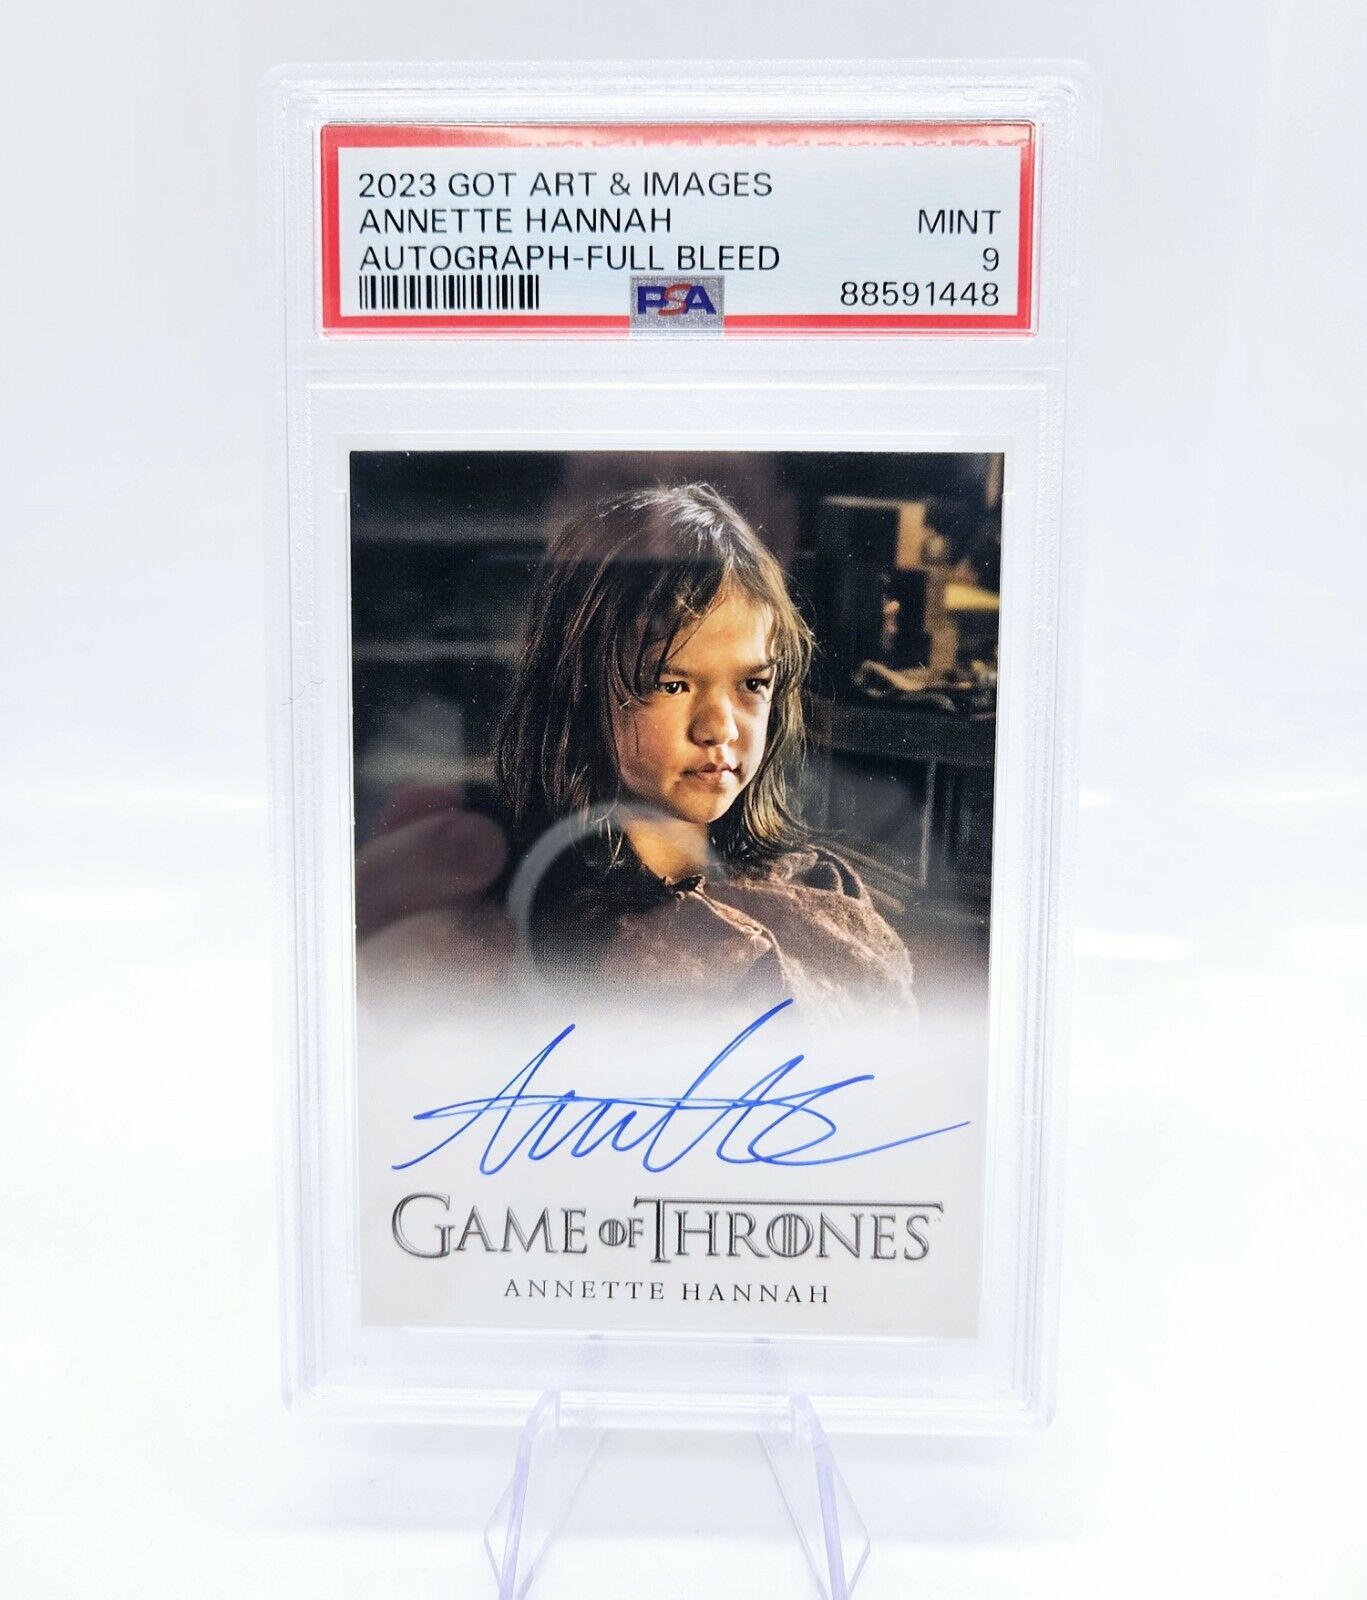 Game of Thrones Annette Hannah as Frances Full Bleed Auto Autograph PSA 9